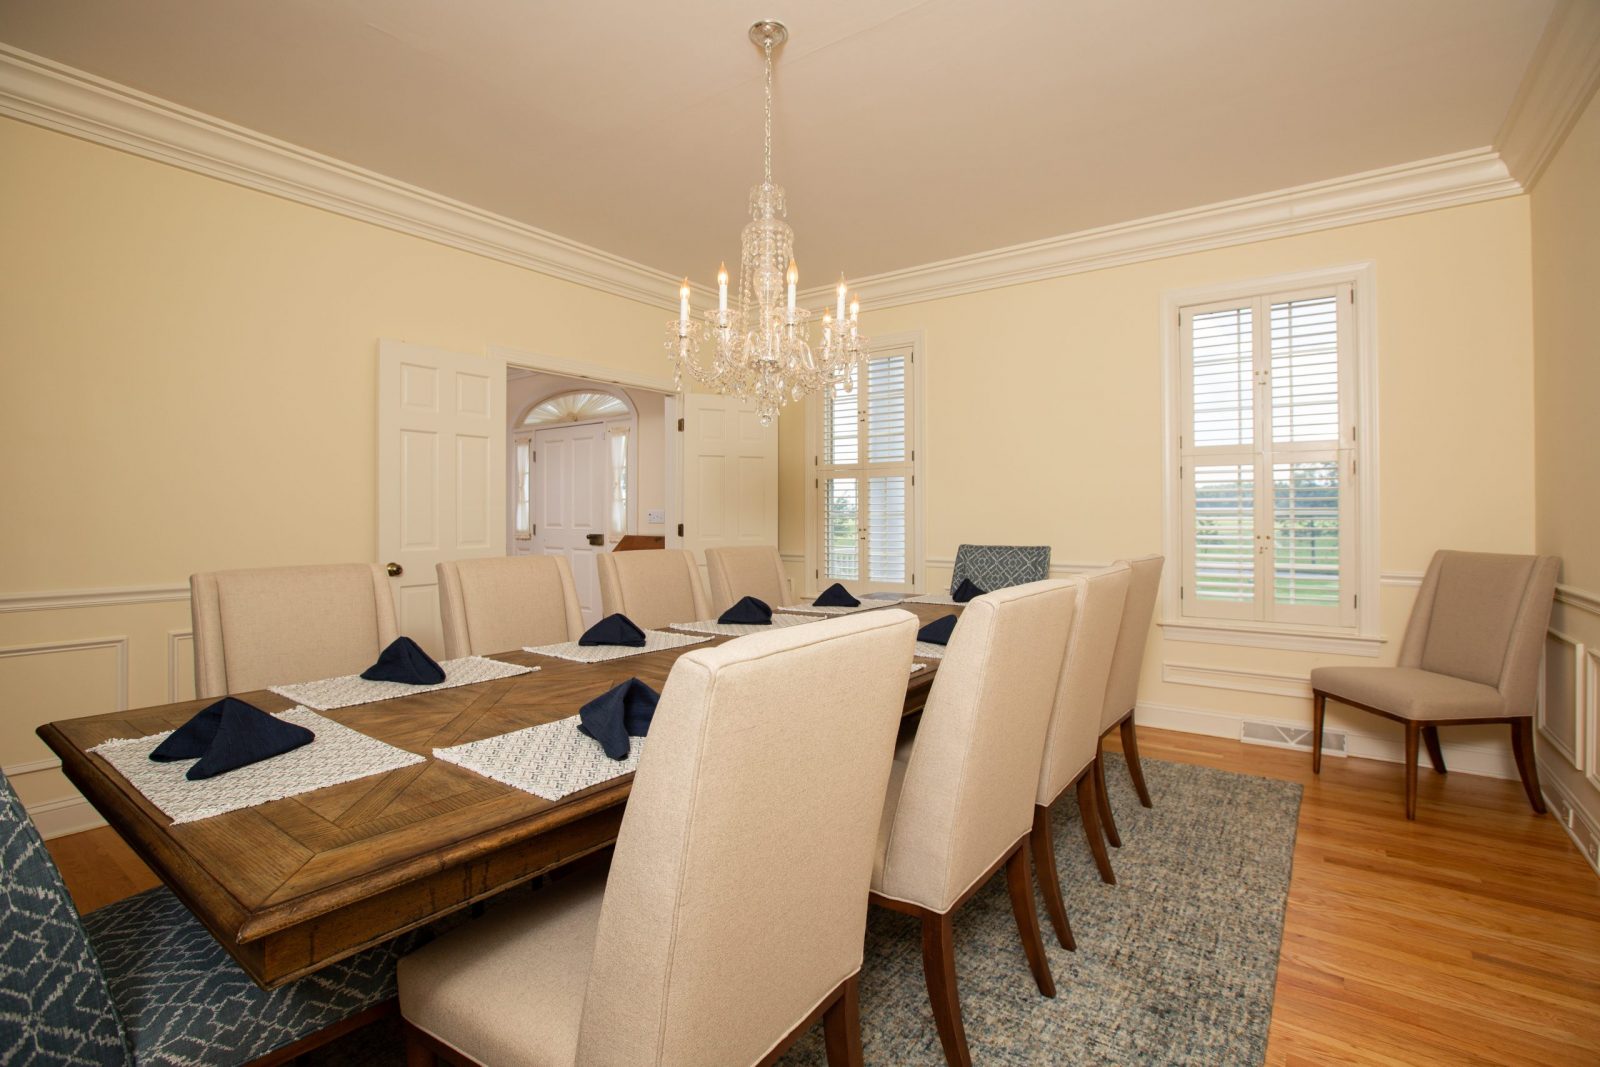 Dining Room with chandelier